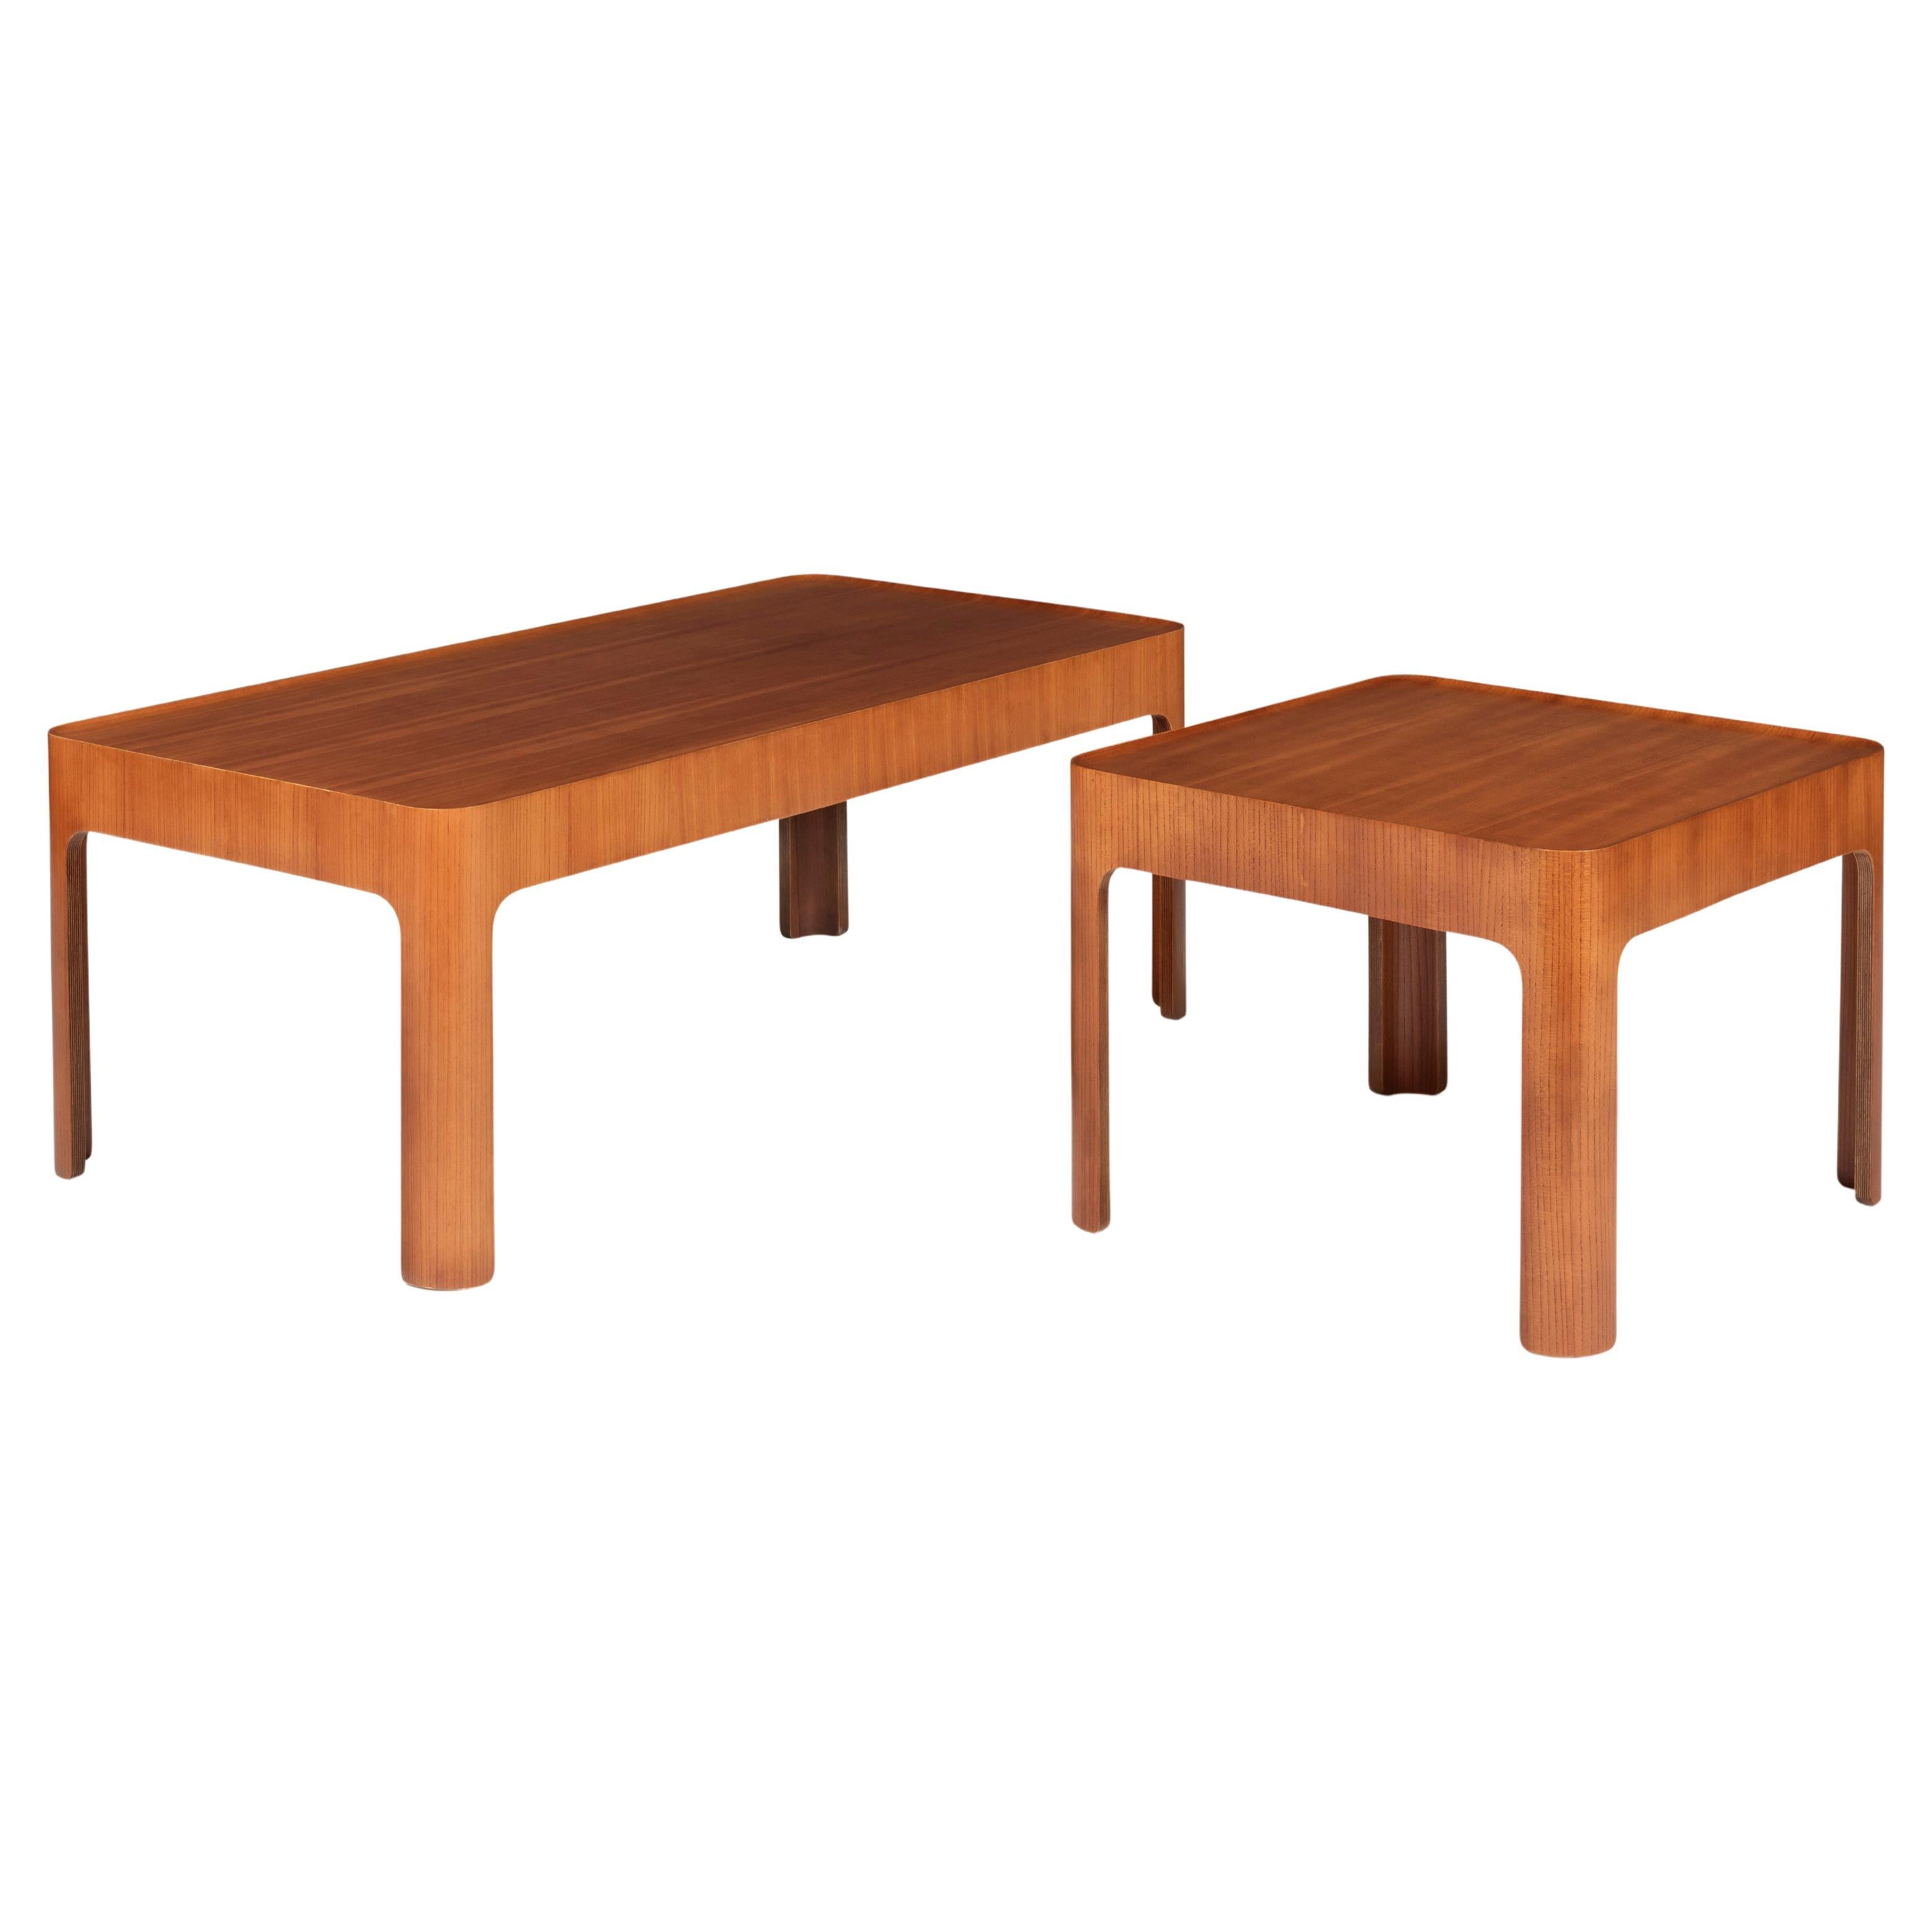 Dimensions : H 45 cm x L 120 cm x D 60 cm 
or H 17.7  x 47.2  x 23.6 inches

Coffee table designed by Isamu Kenmochi manufactured by Tendo Mokko in Japan, circa 1967. In good original condition with minor wear consistent with age and use, preserving